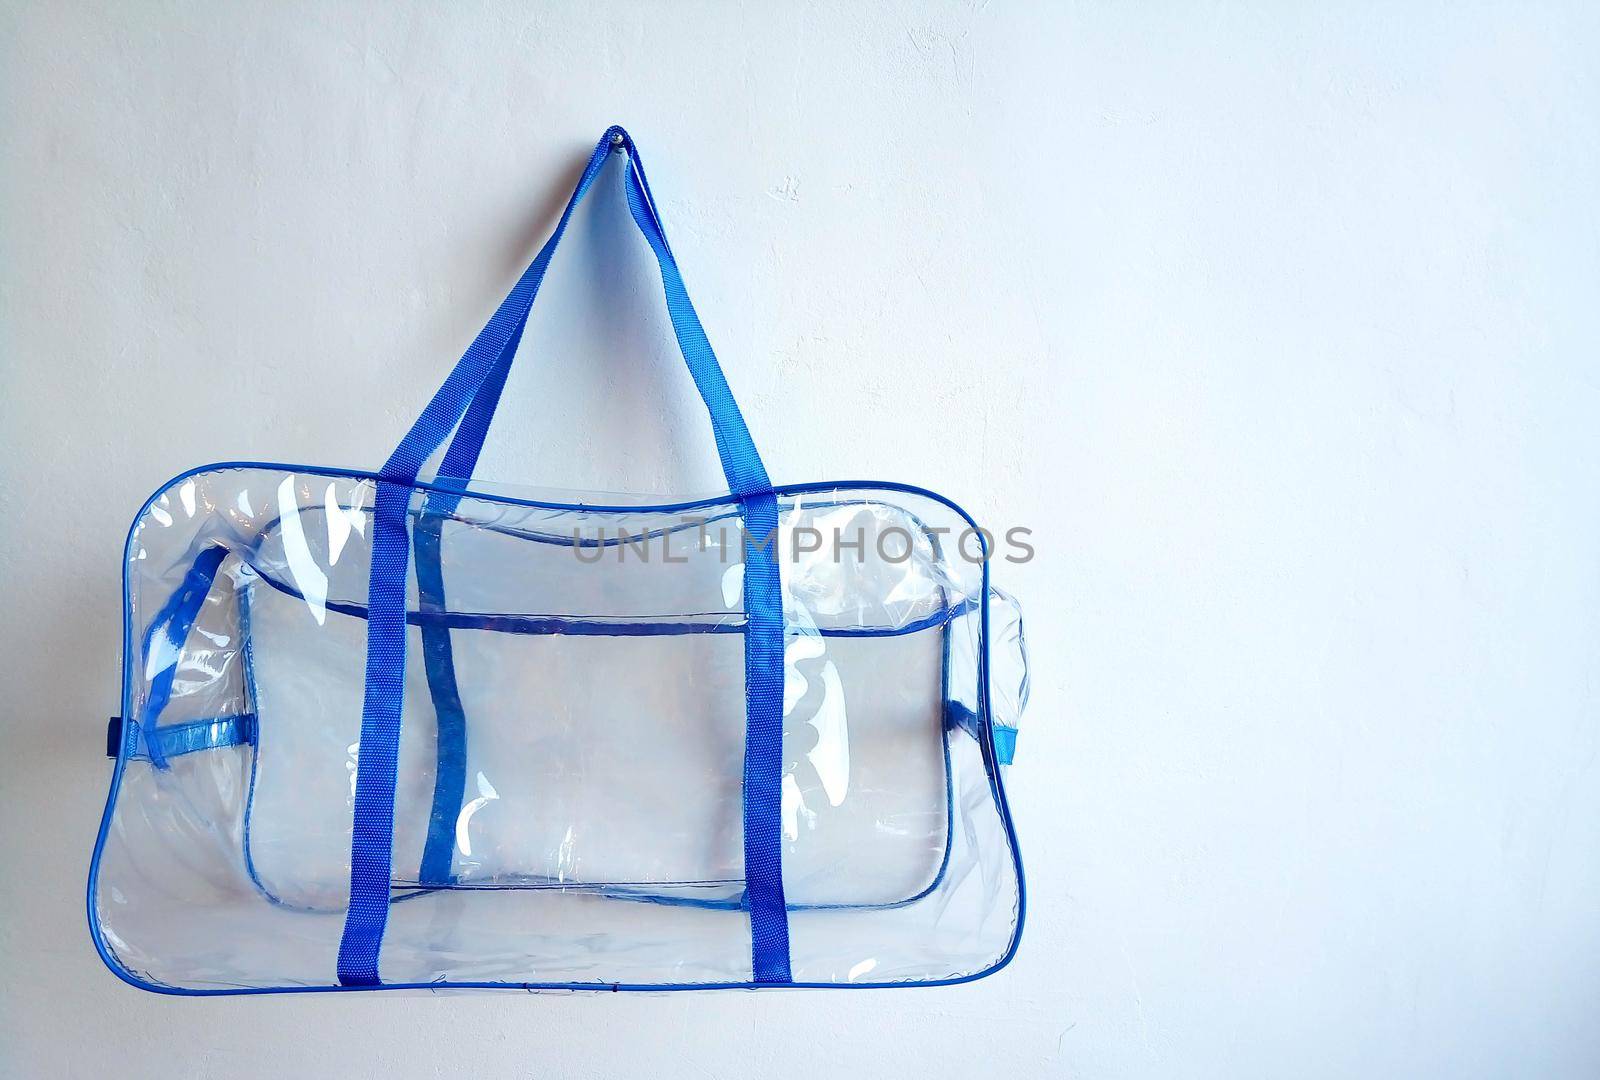 Plastic bag with blue handles hanging on a nail, on a white background.